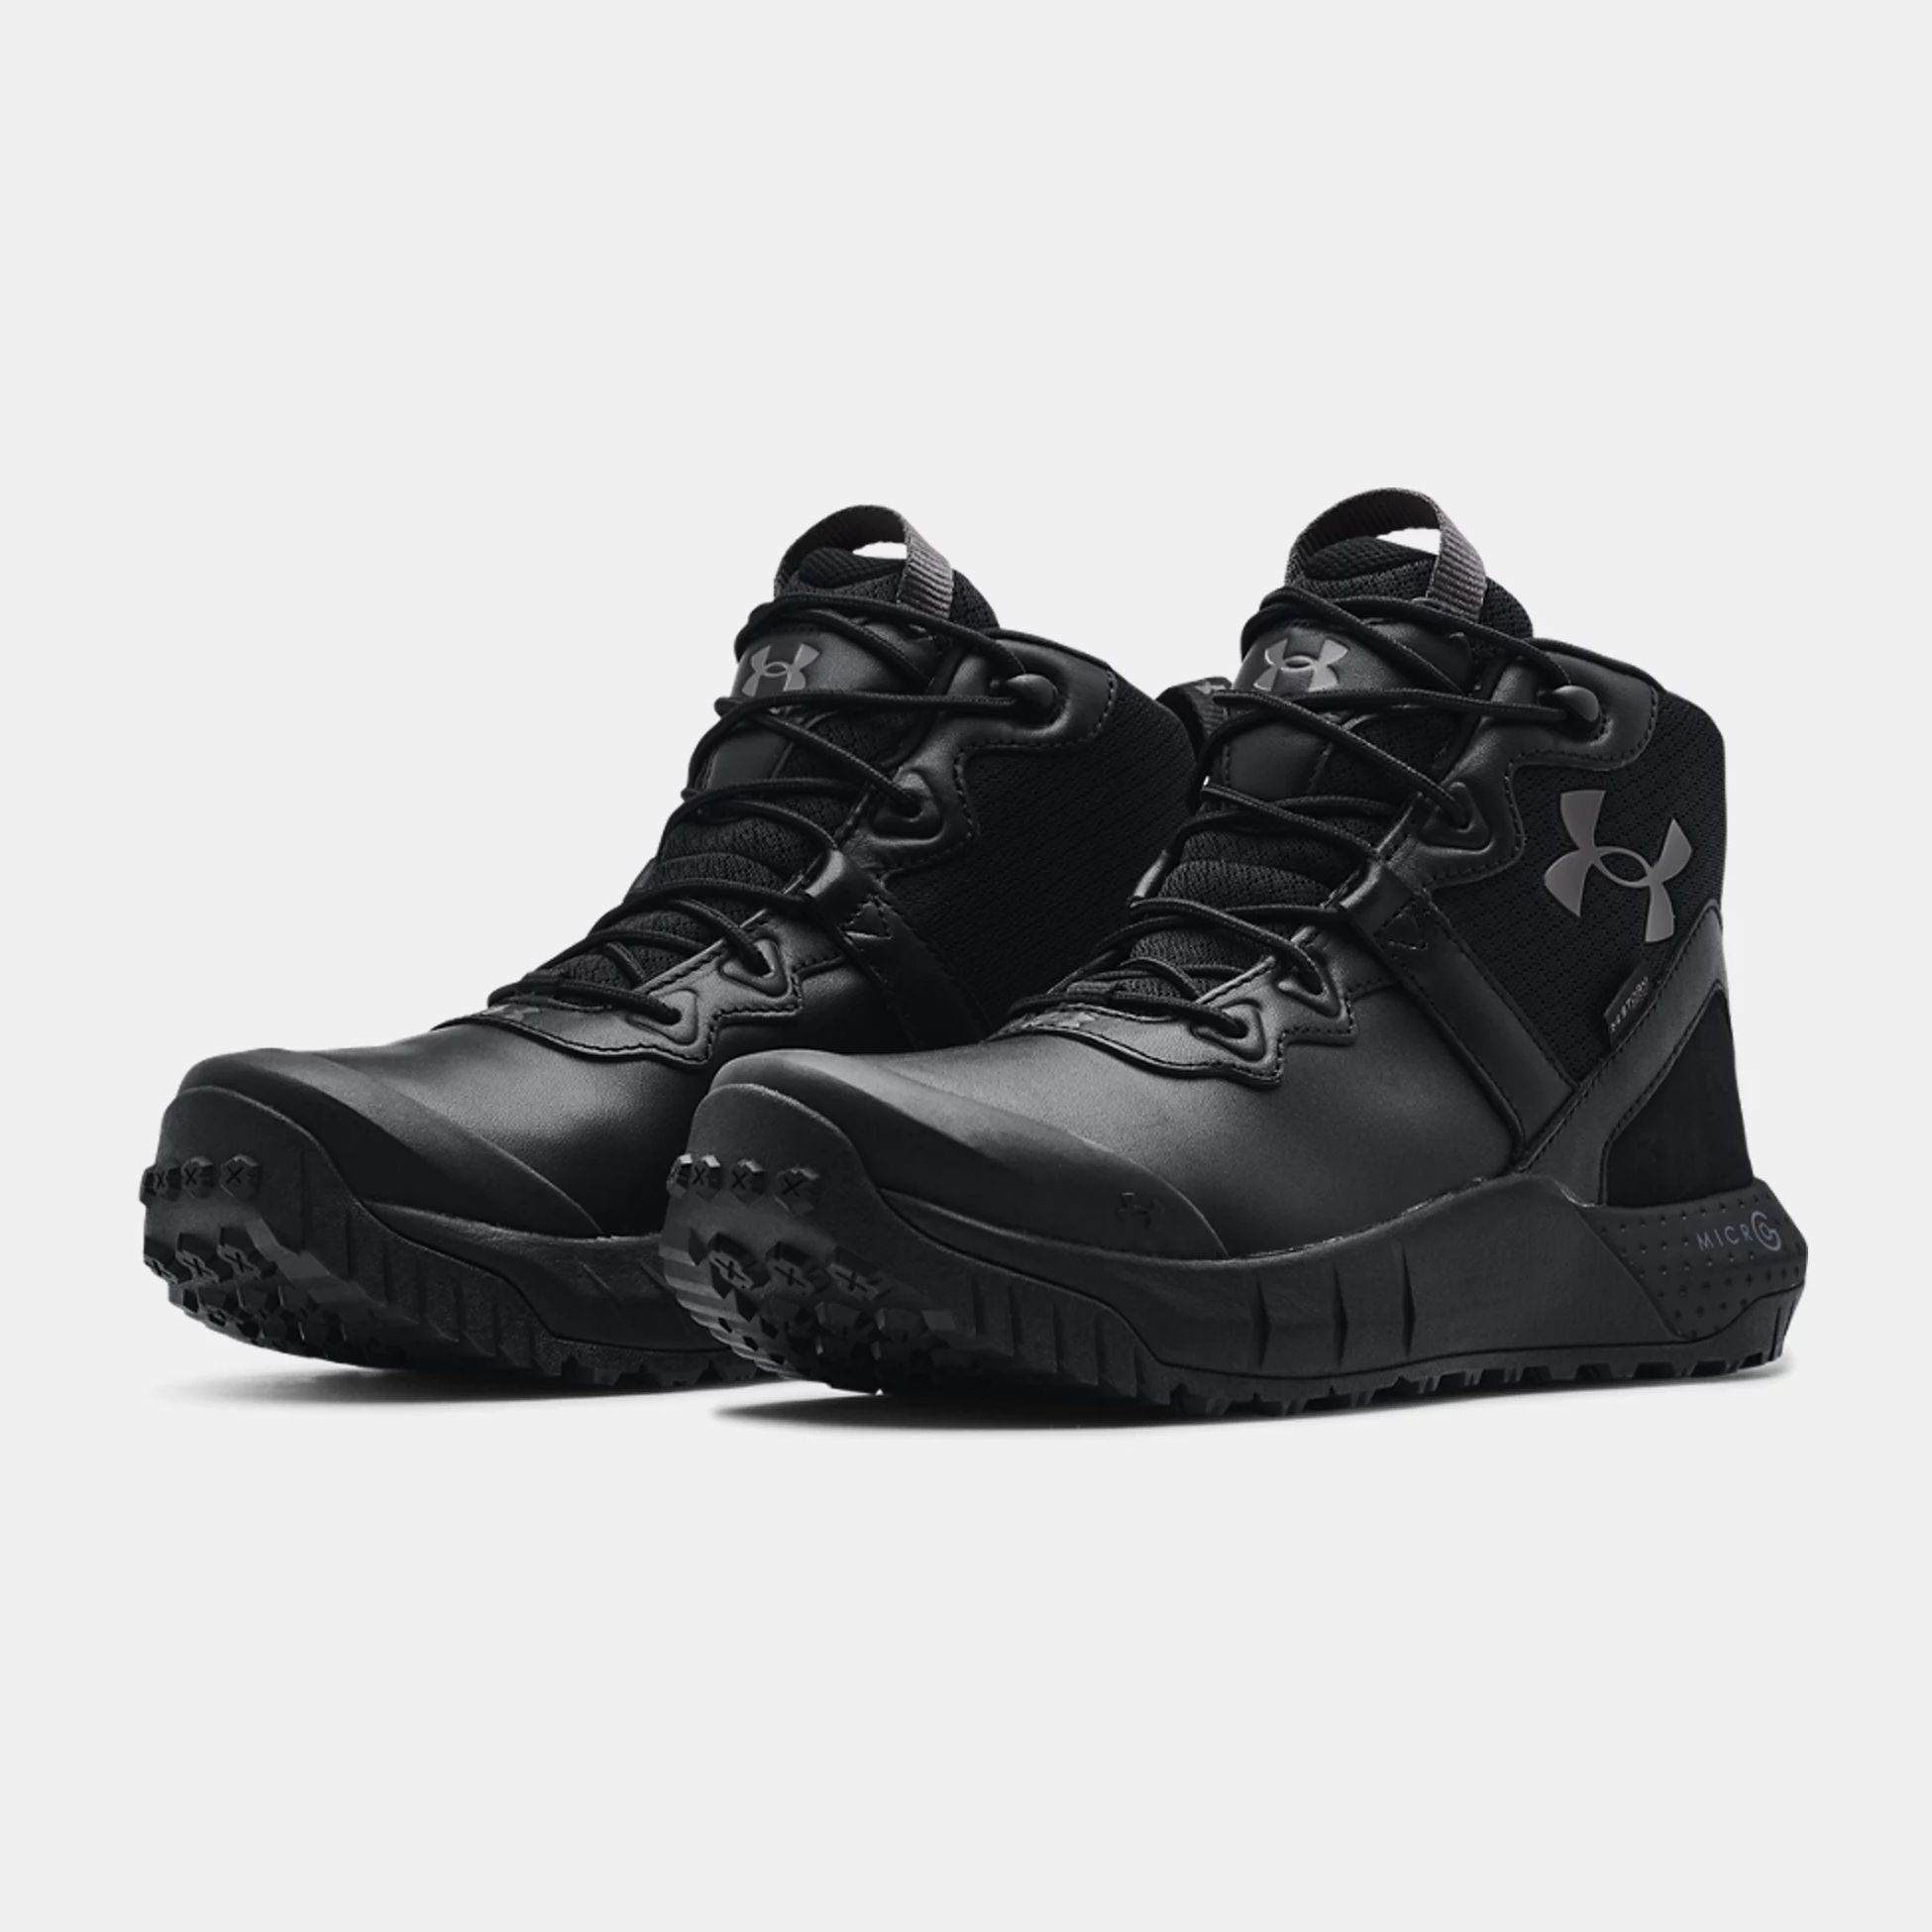 UNDER ARMOUR UA Micro G Valsetz Mid Leather WP Tactical Boots